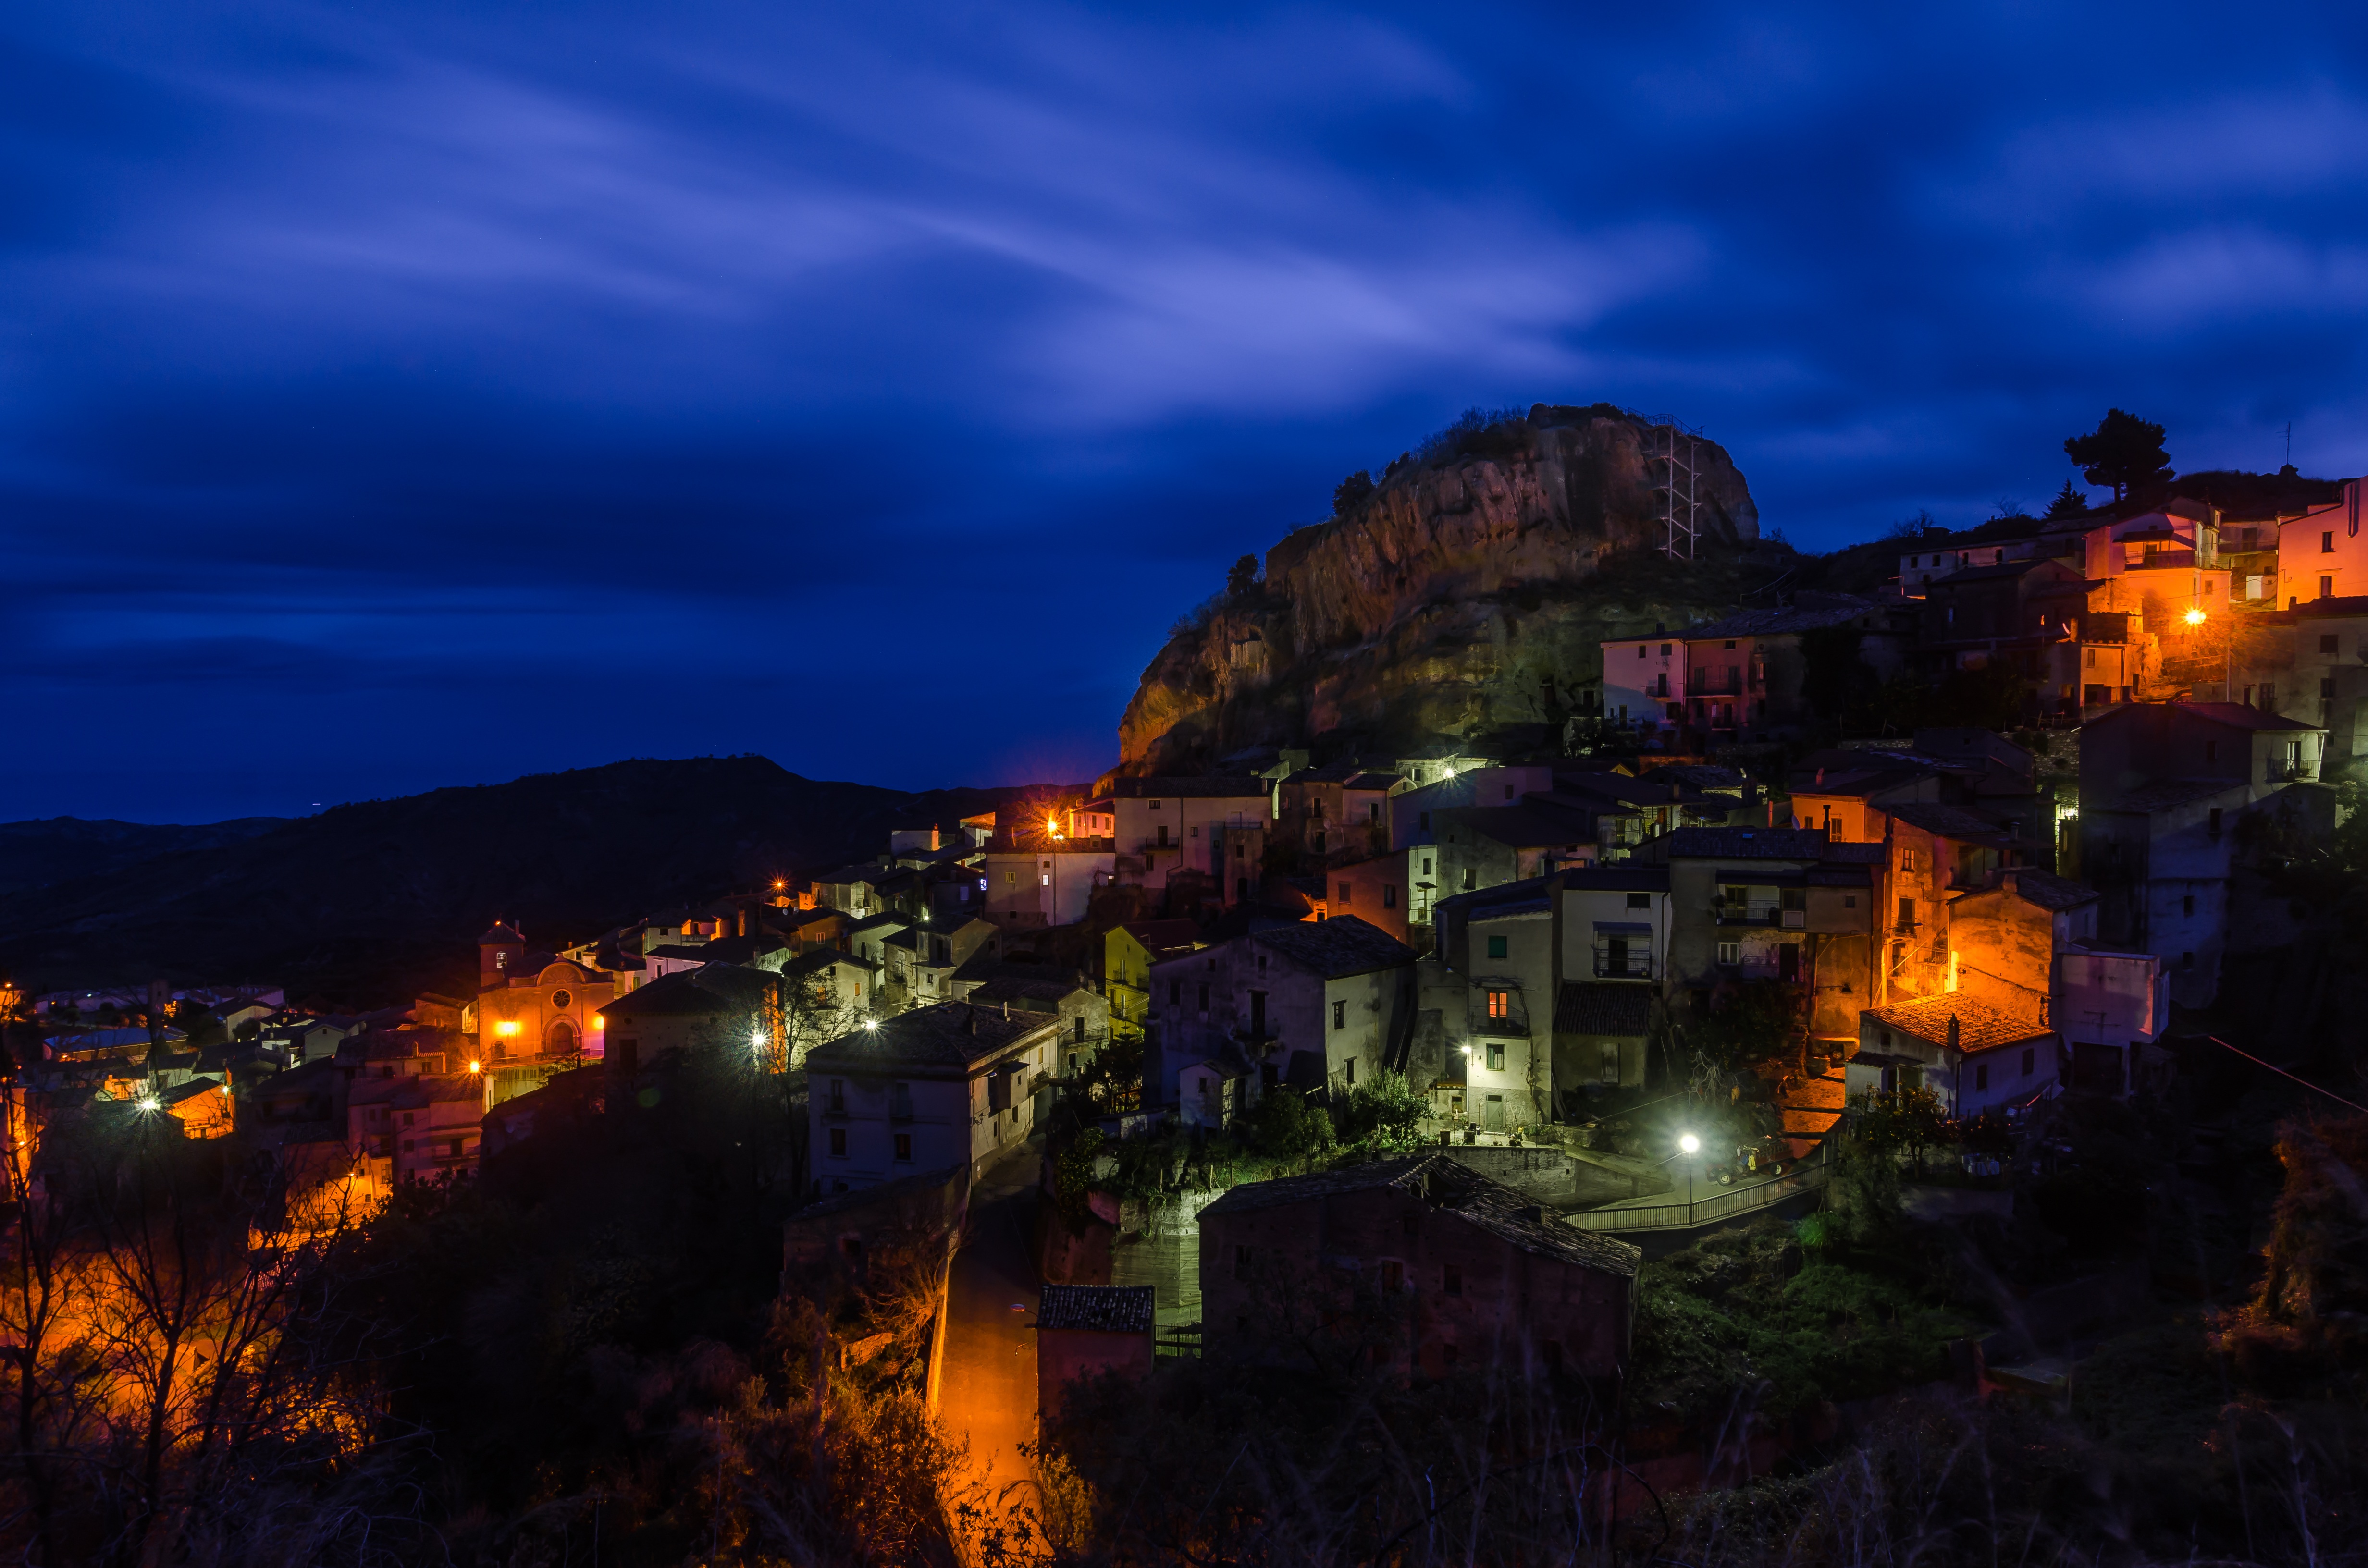 General 4928x3264 Calabria night Italy lights landscape clouds low light